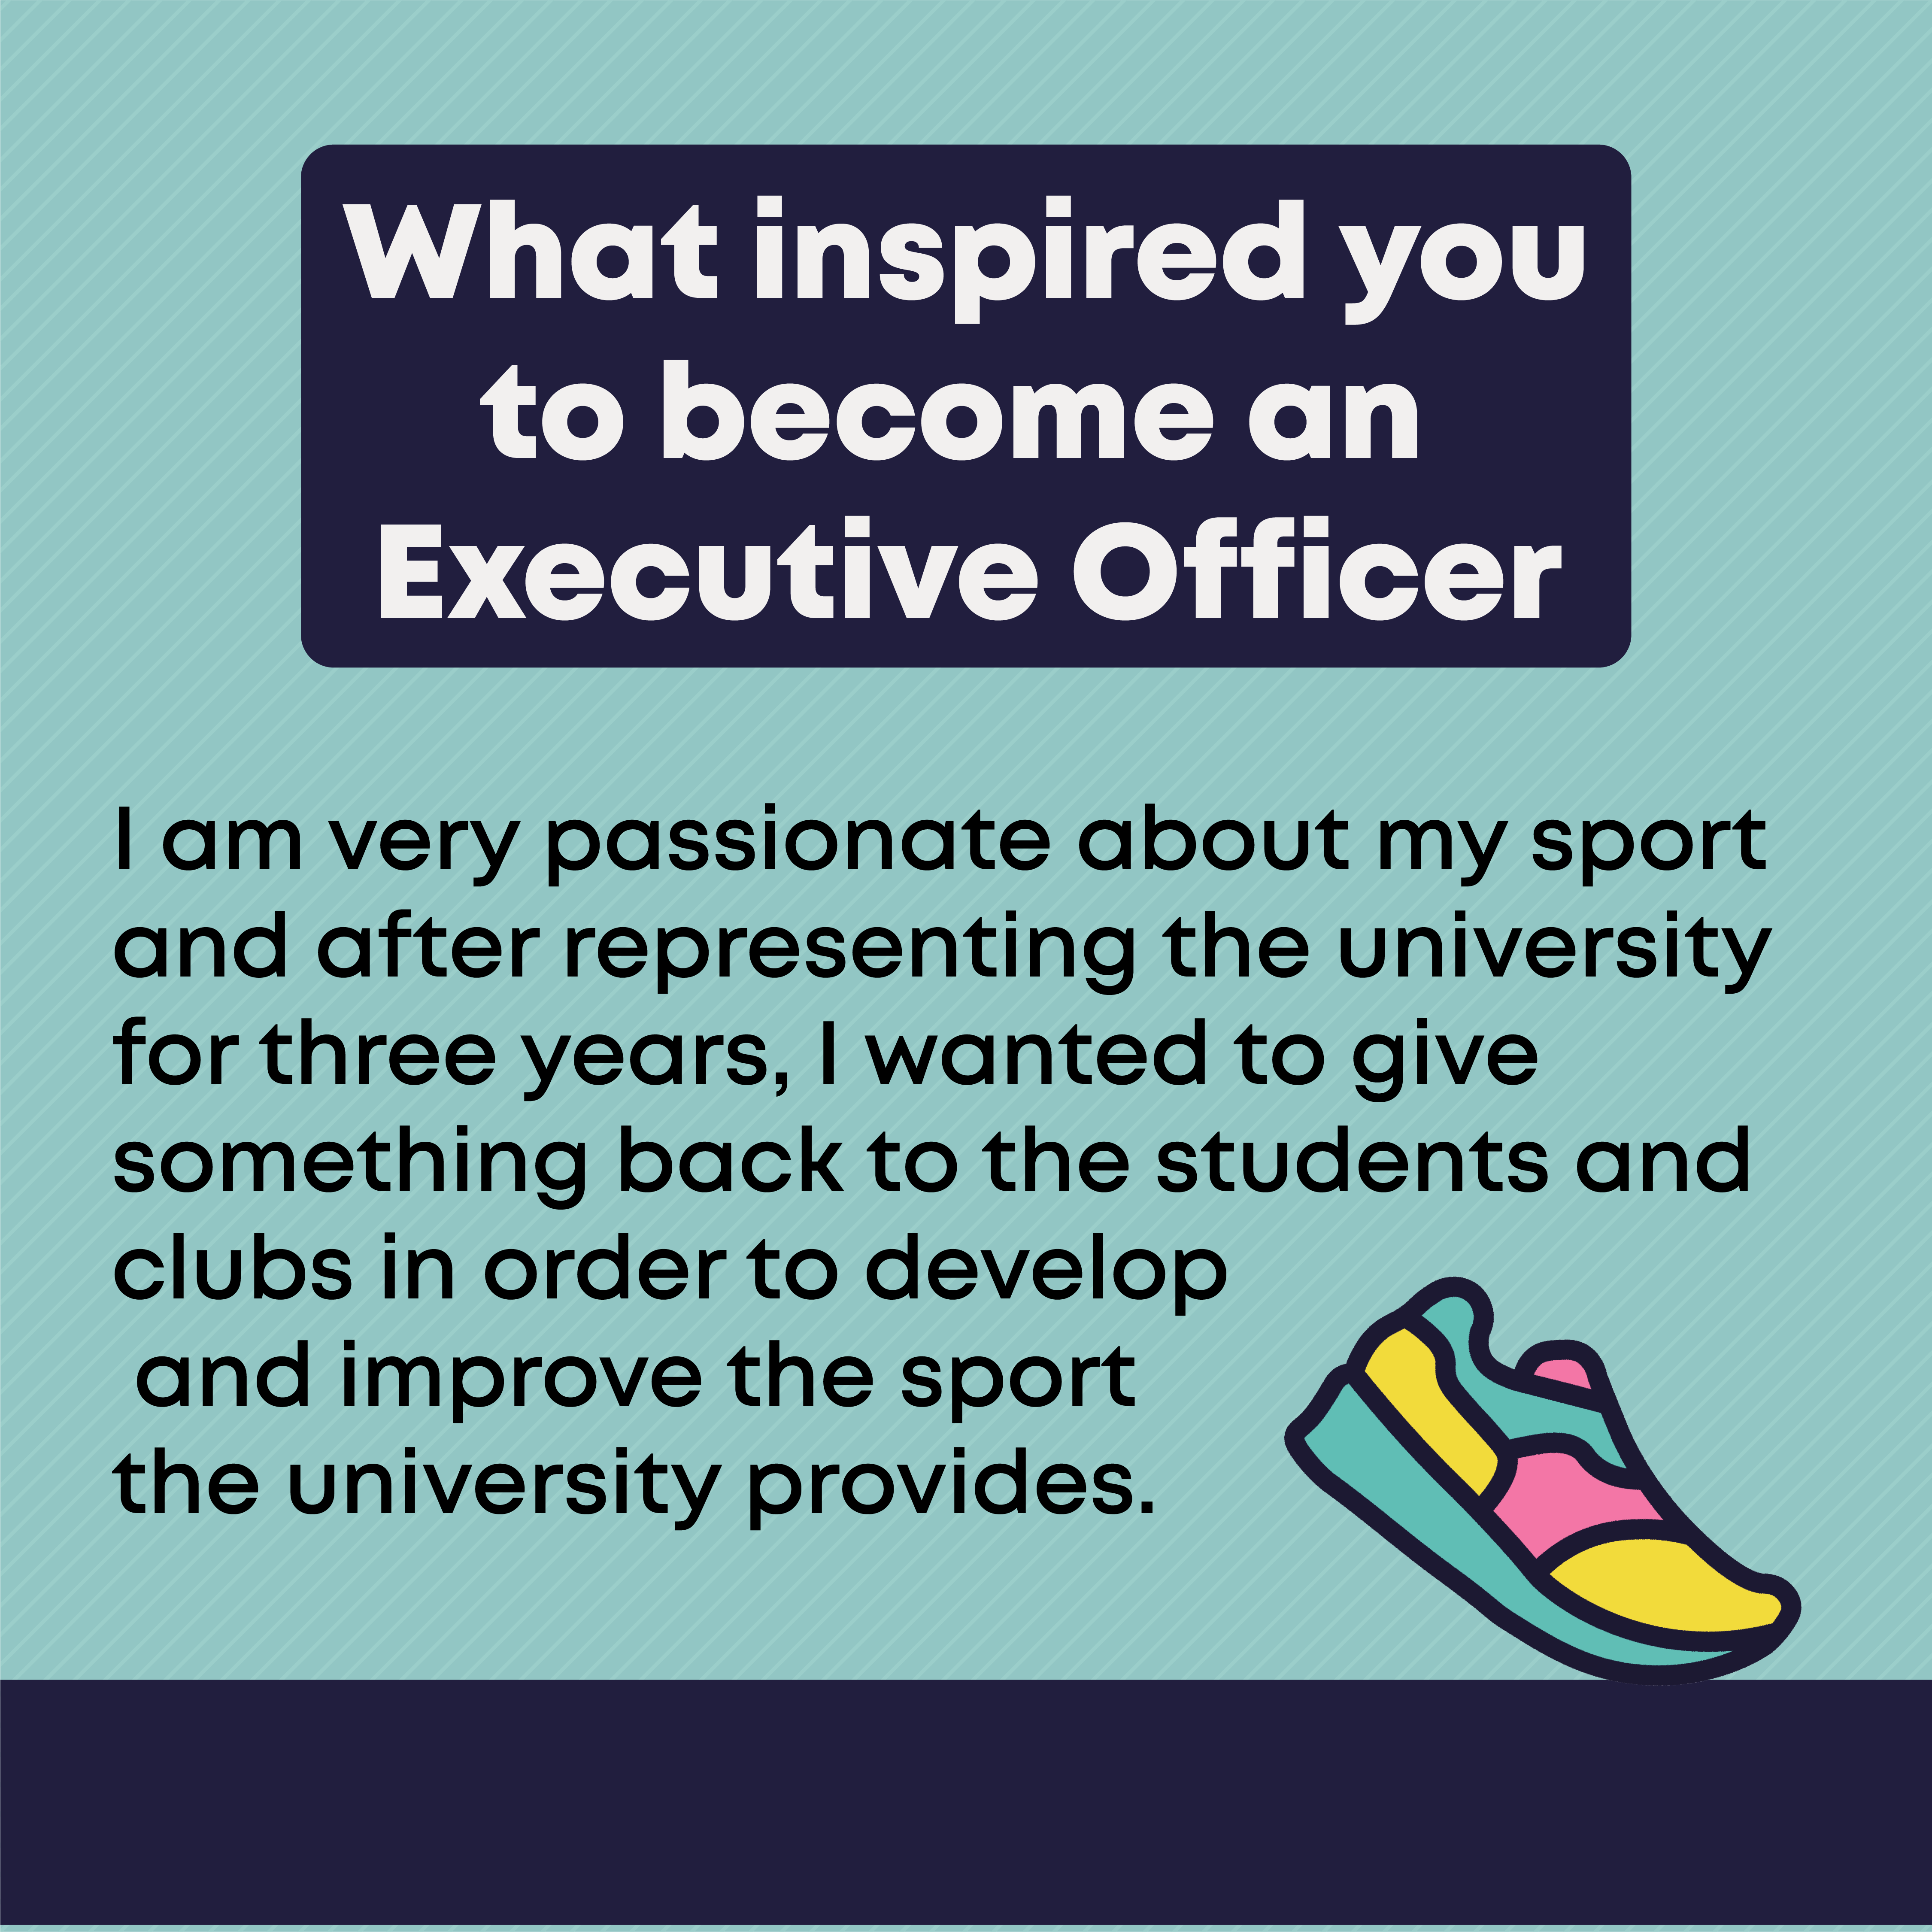 What inspired you to become an Executive Officer?  I am very passionate about my sport and after representing the university for three years, I wanted to give something back to the students and clubs in order to develop and improve the sport the university provides.